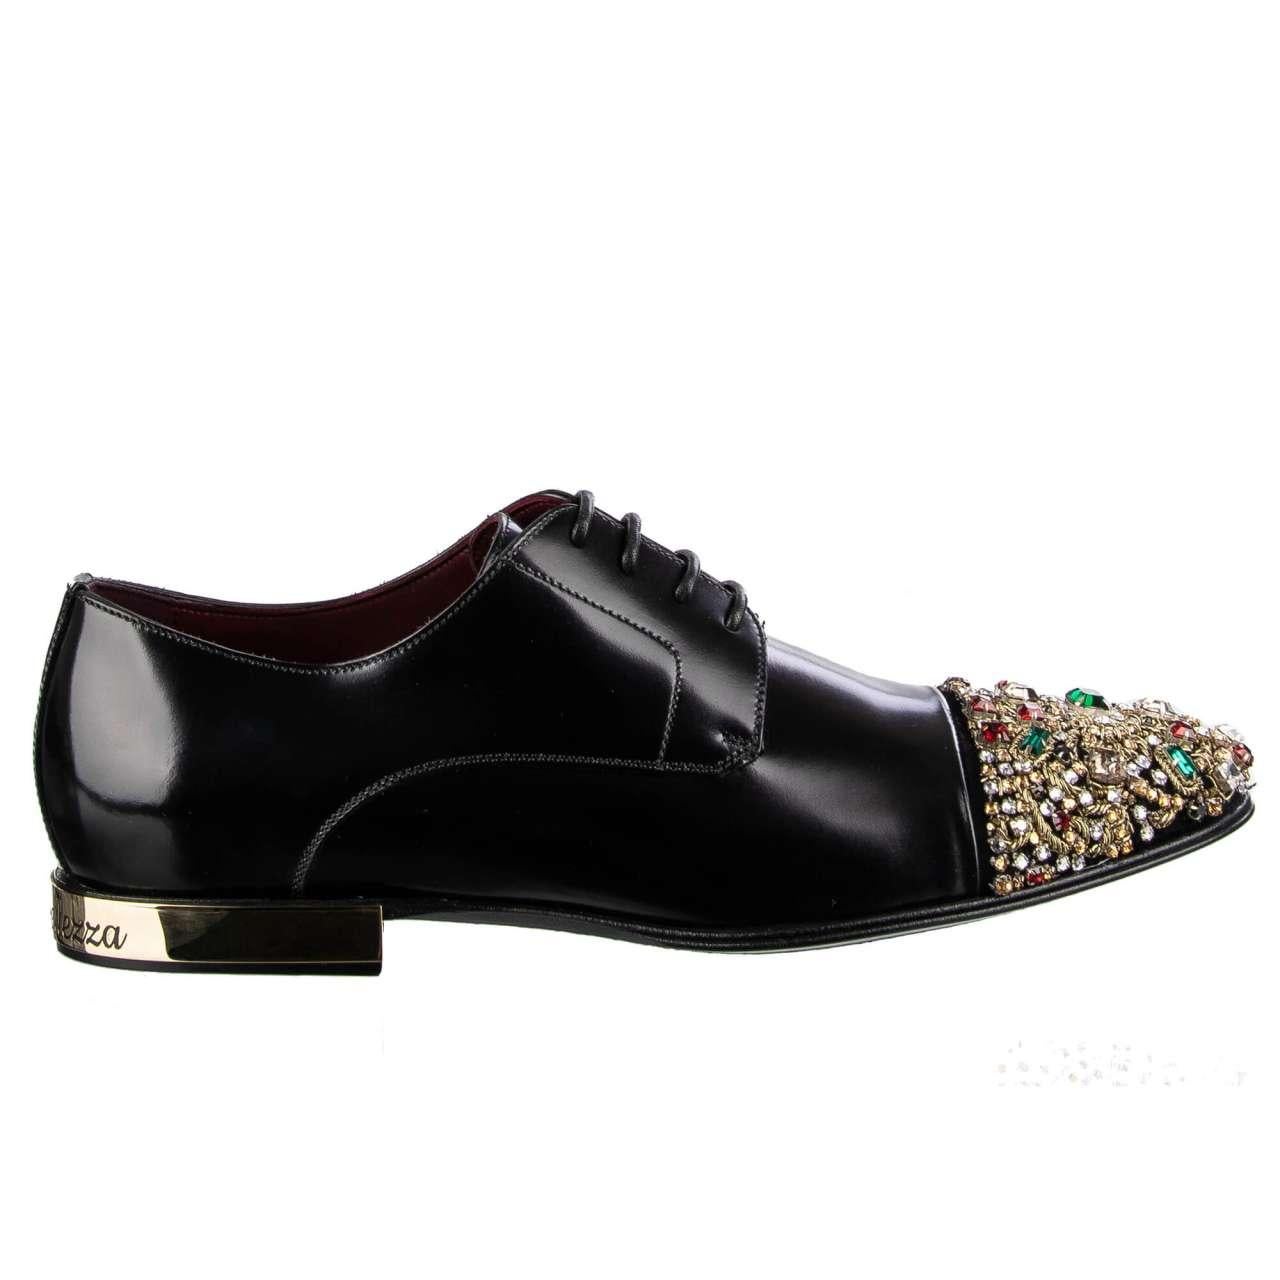 - Exclusive patent leather derby shoes POSITANO in black with crystals embellished toe and L'Amore e' bellezza heel by DOLCE & GABBANA - MADE IN ITALY - Former RRP: EUR 1,450 - RUNWAY - Dolce&Gabbana Fashion Show - New with Box - Model: